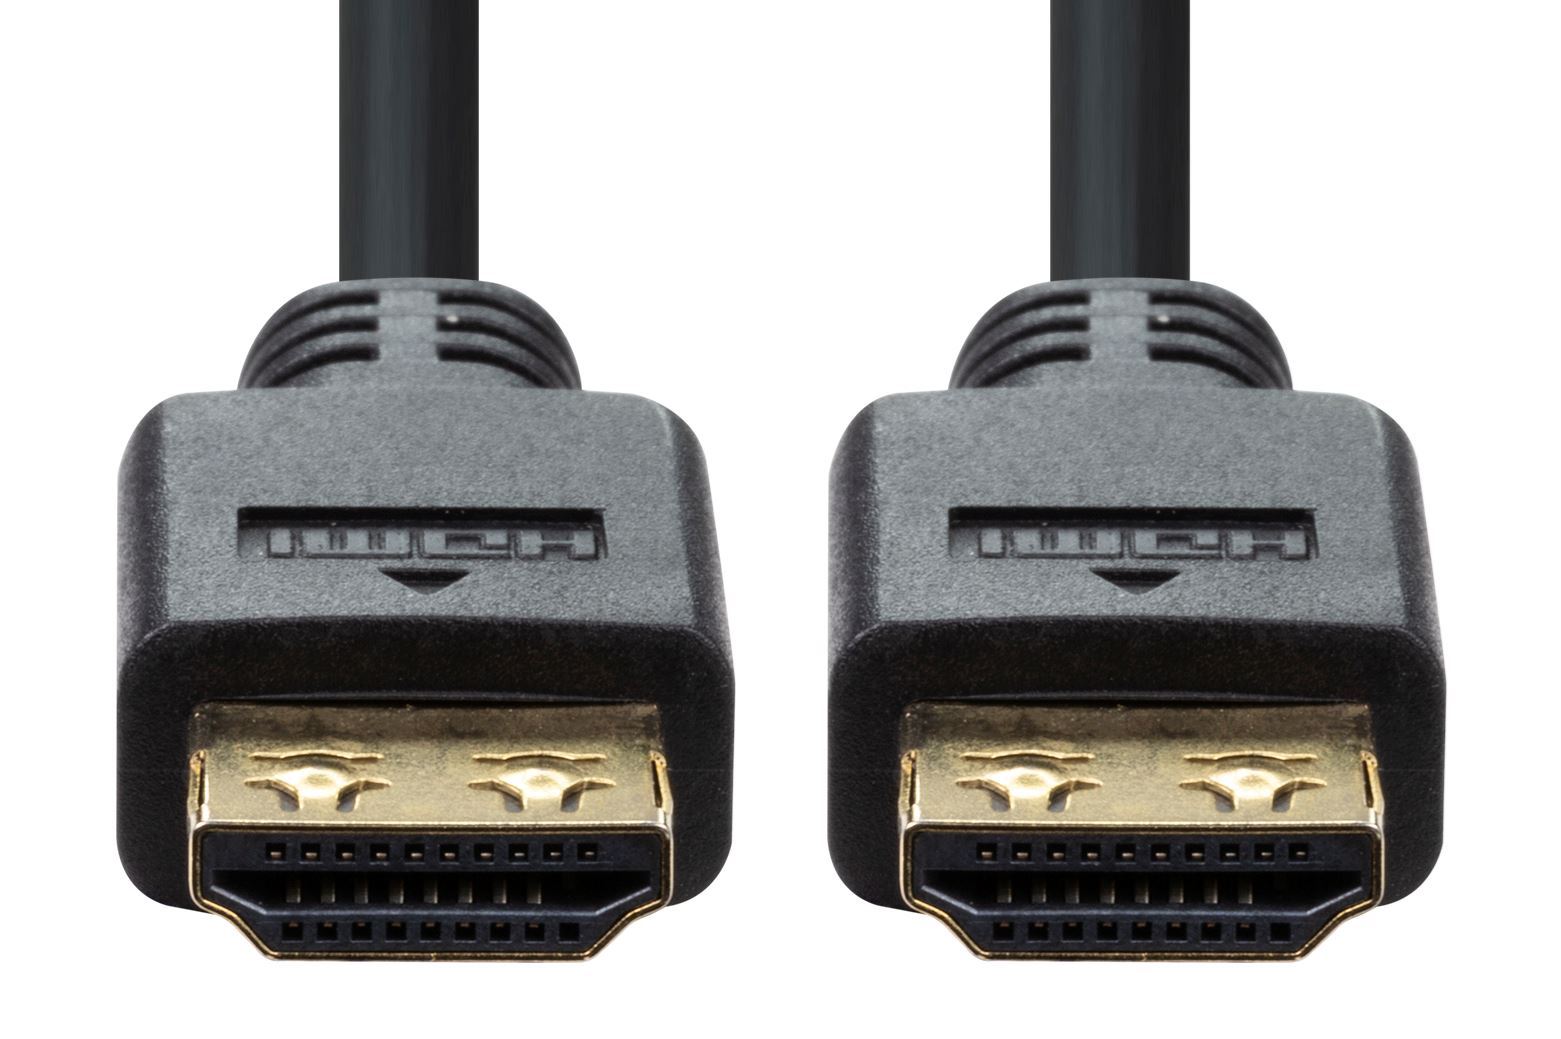 DYNAMIX_12.5M_HDMI_High_Speed_Flexi_Lock_Cable_with_Ethernet._Max_Res:_4K2K@30Hz._Supports_ARC_and_3D. 721